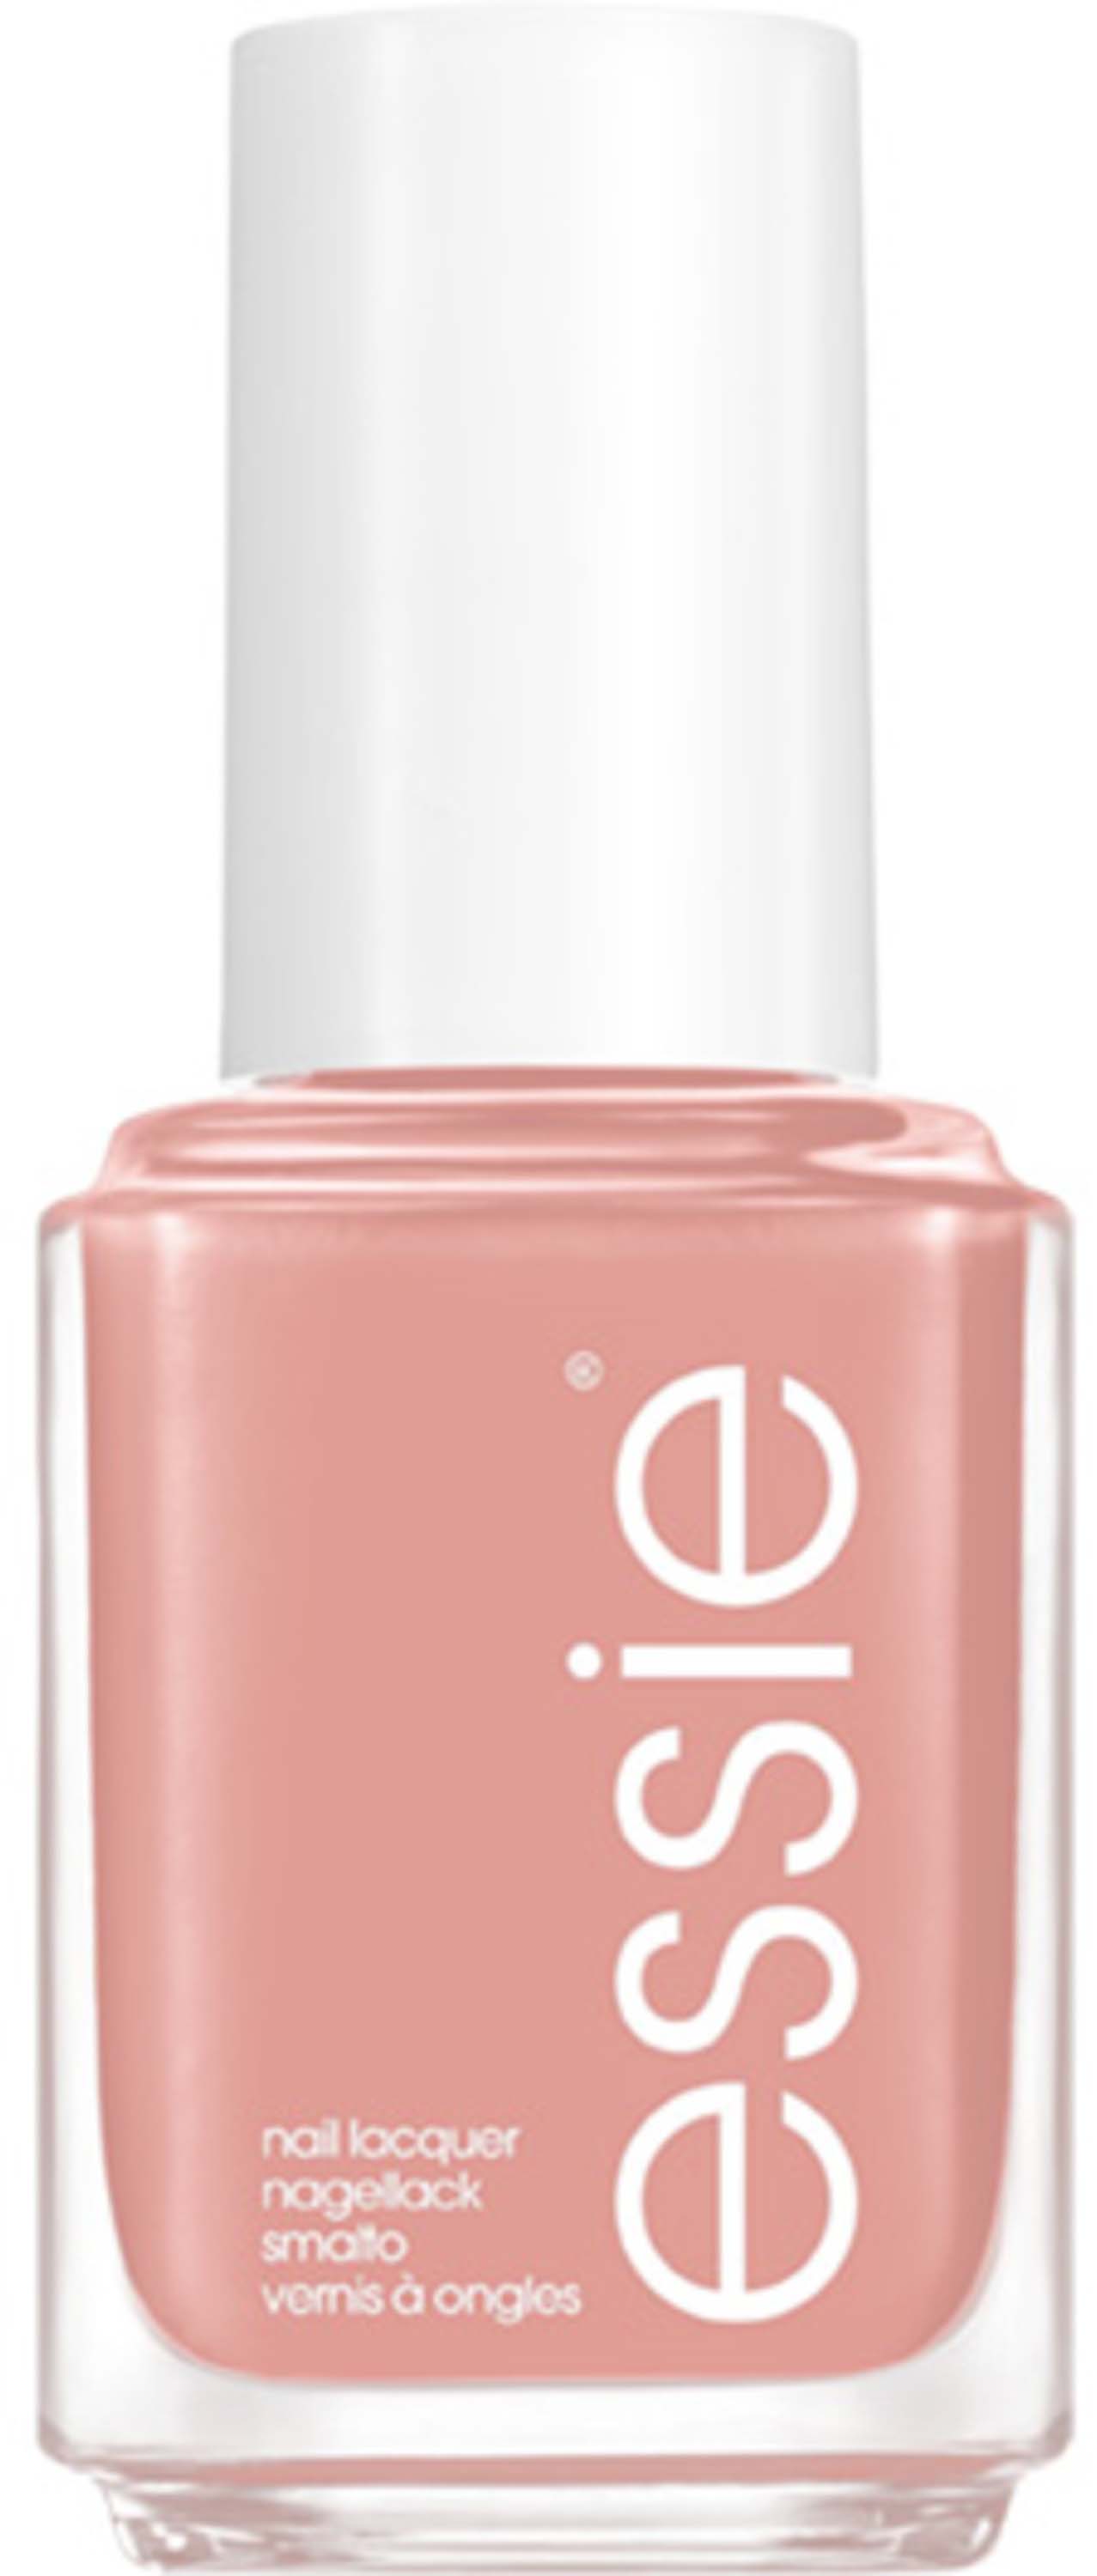 Lacquer The Snuggle Essie for collection Nail 749 not red-y Is bed Real